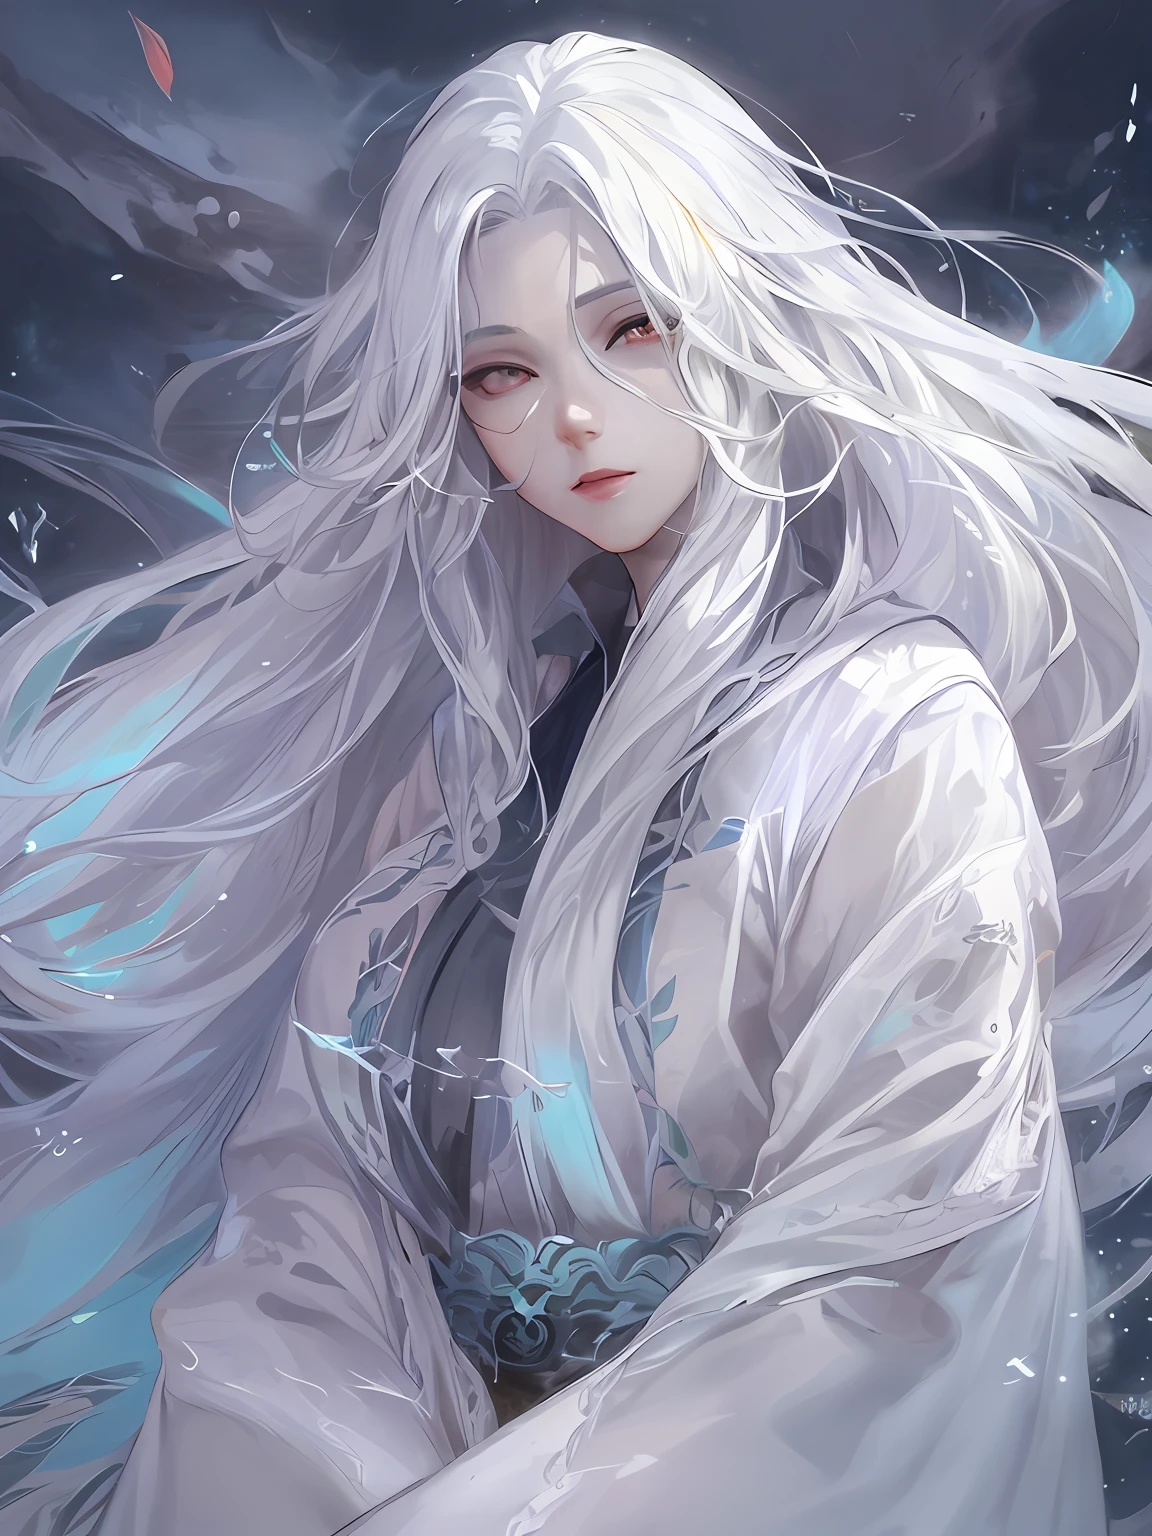 A pixiv competition winner, fantasy art, white-haired god, beautiful character painting, guvez style artwork, dazzling gaze of Yuki Onna, guweiz, long white hair, flowing hair and robes, cute big eyes, illustrations, fine lines, deep color